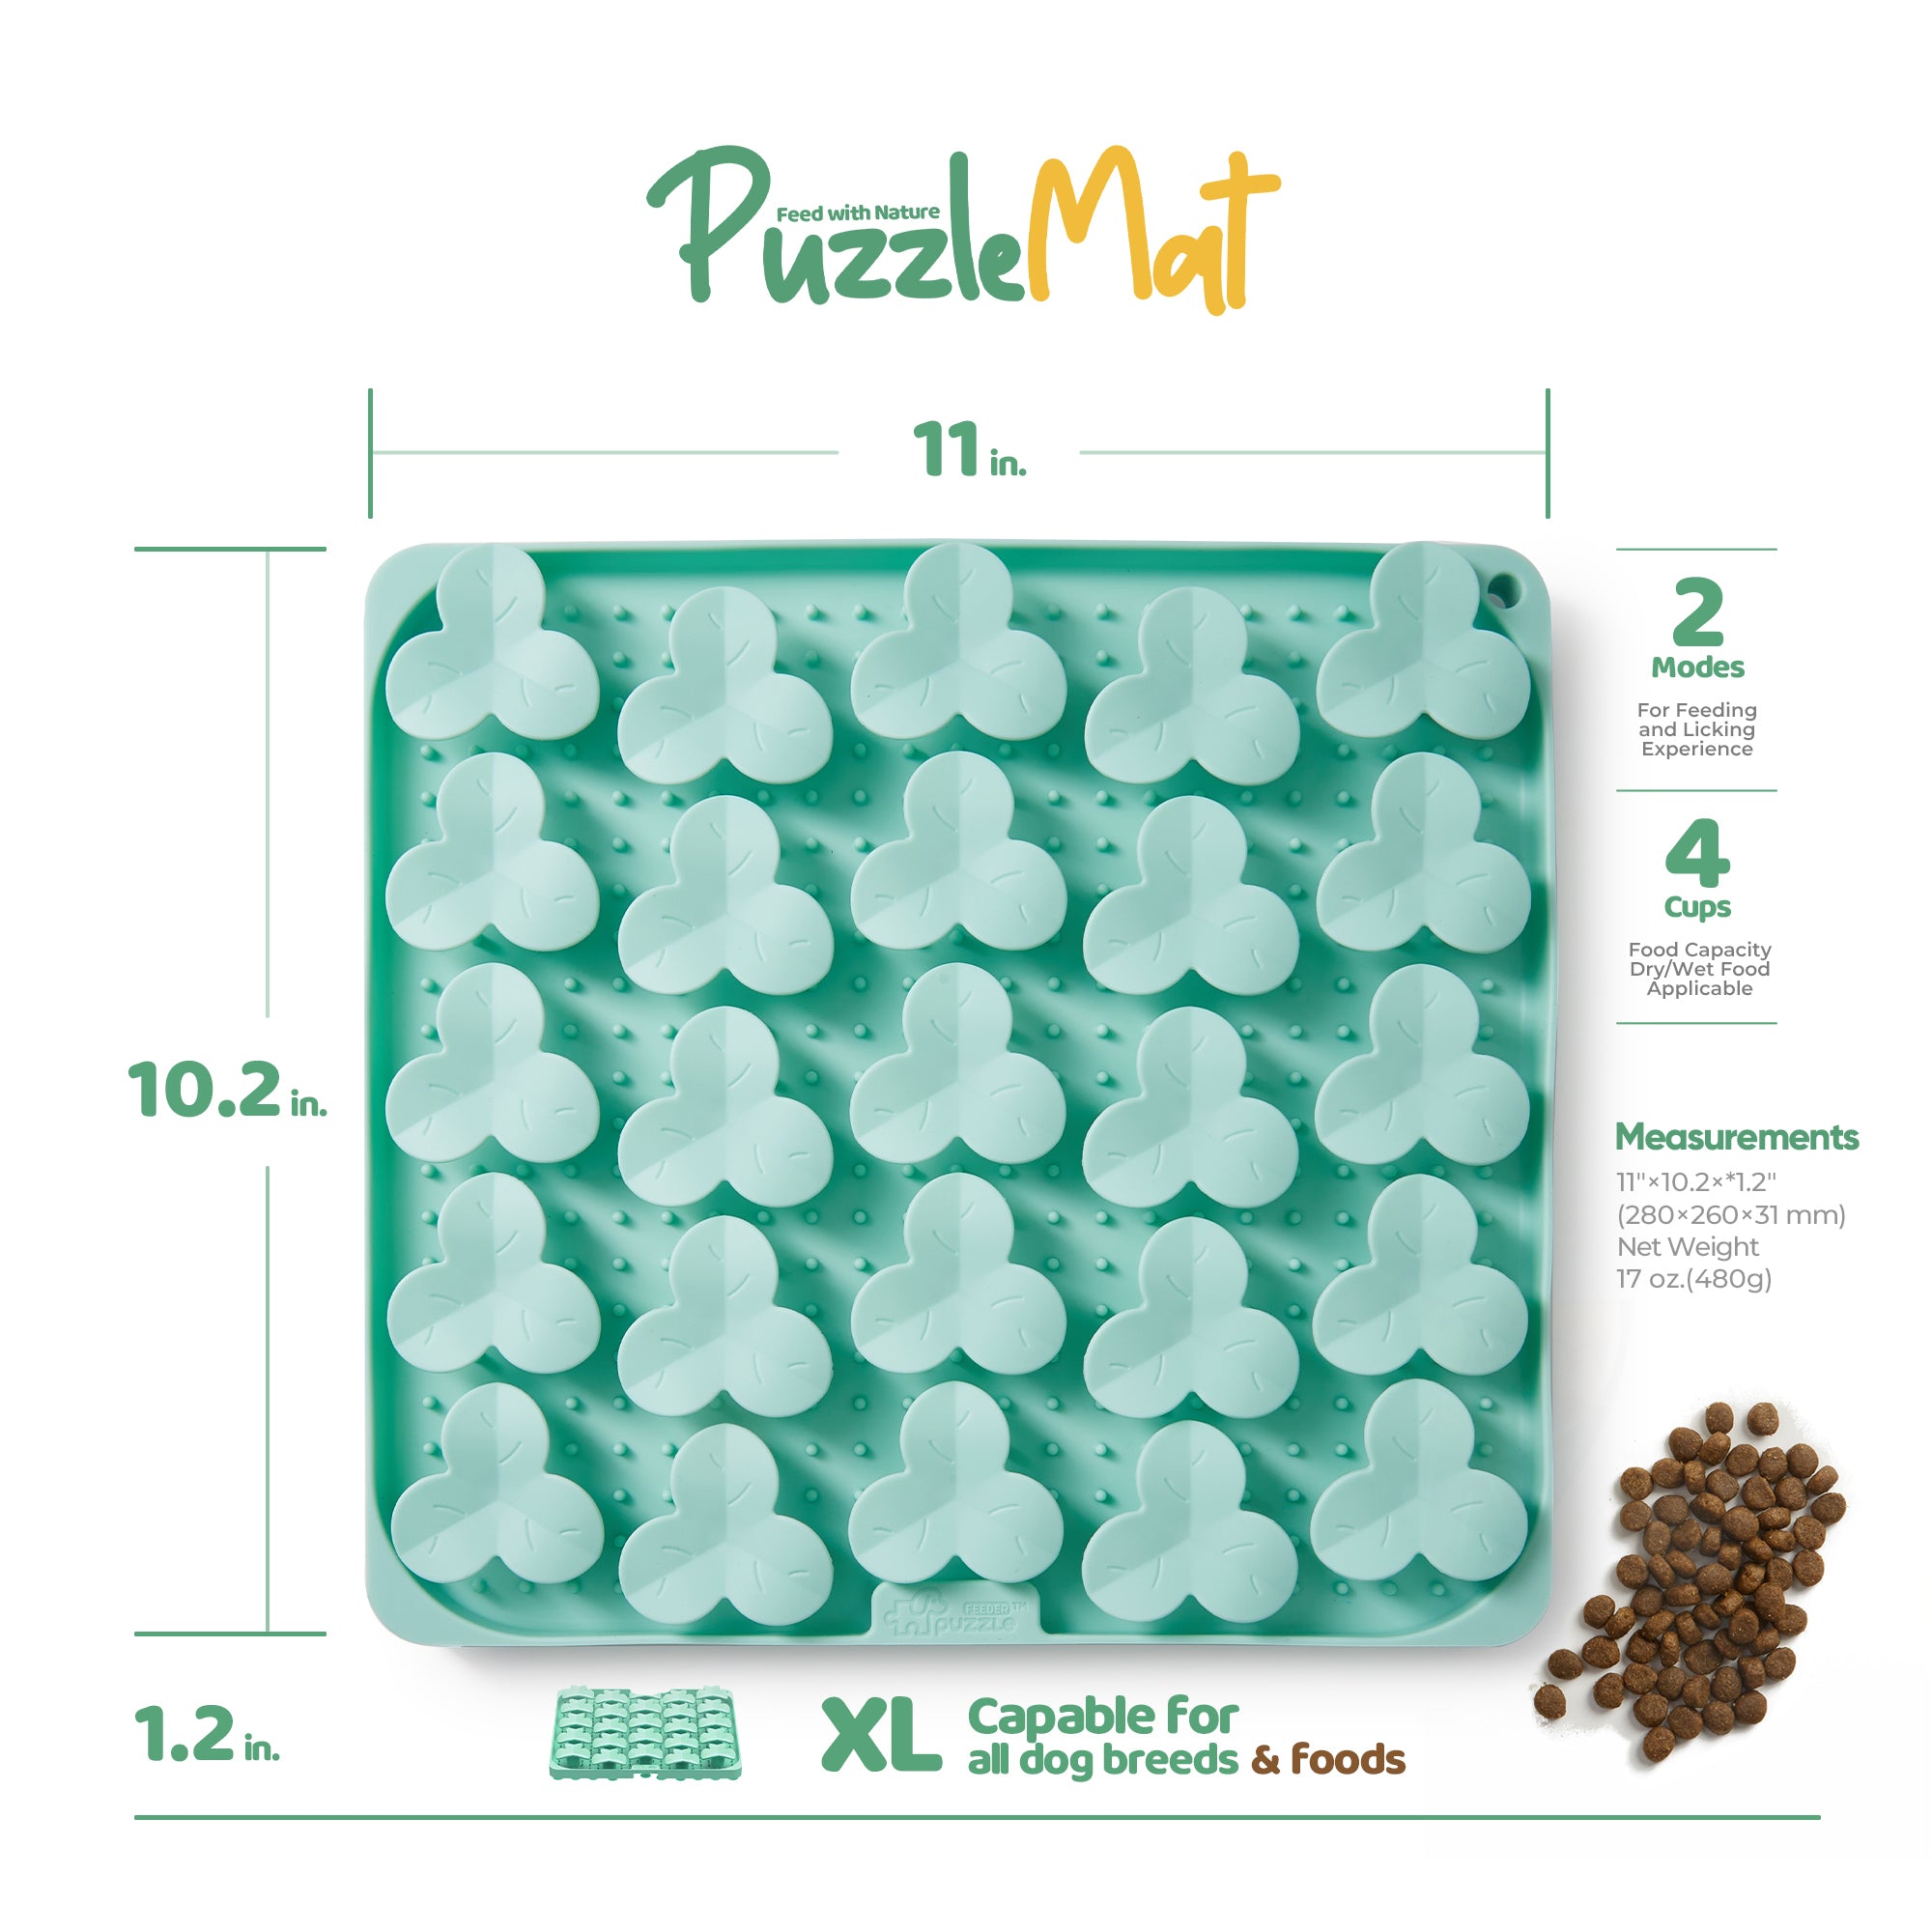 Puzzle Mat / Feed with Nature (Lawn-Green)